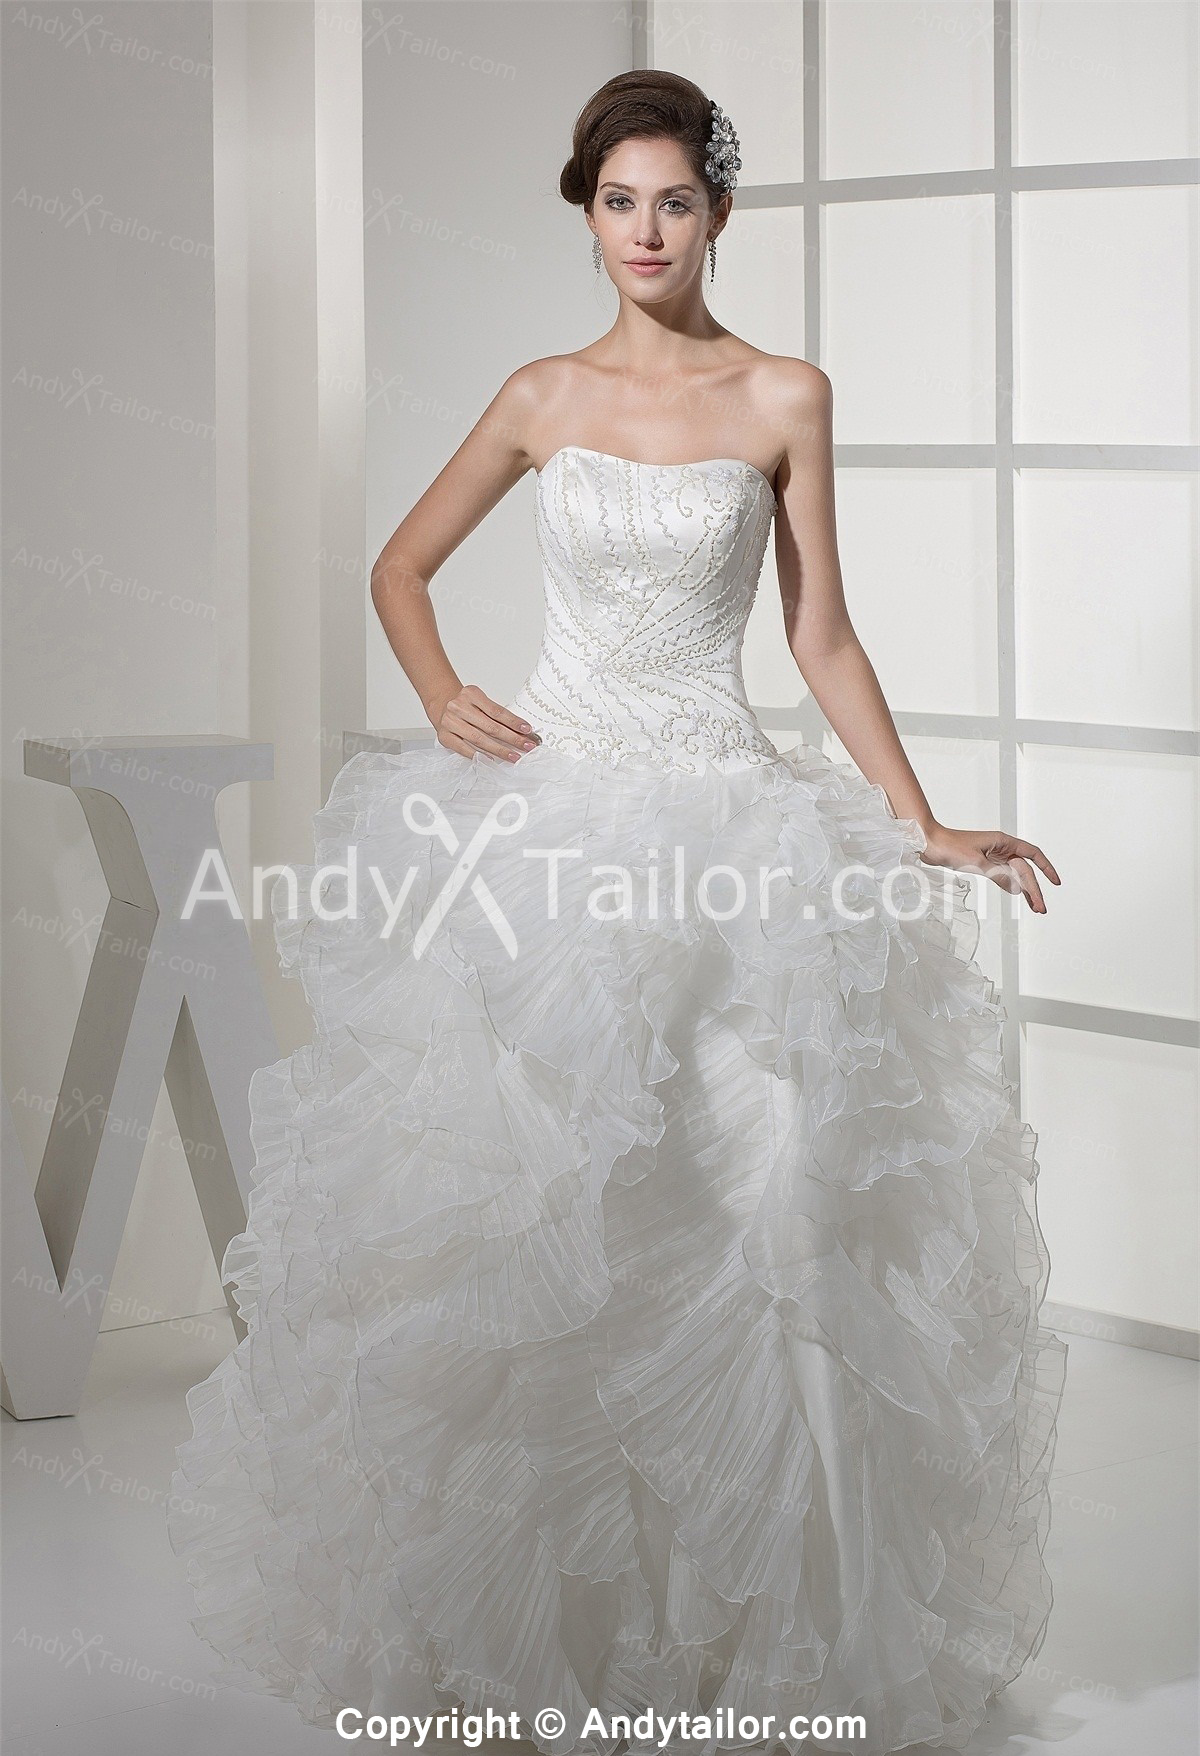 Best place to find dress for wedding